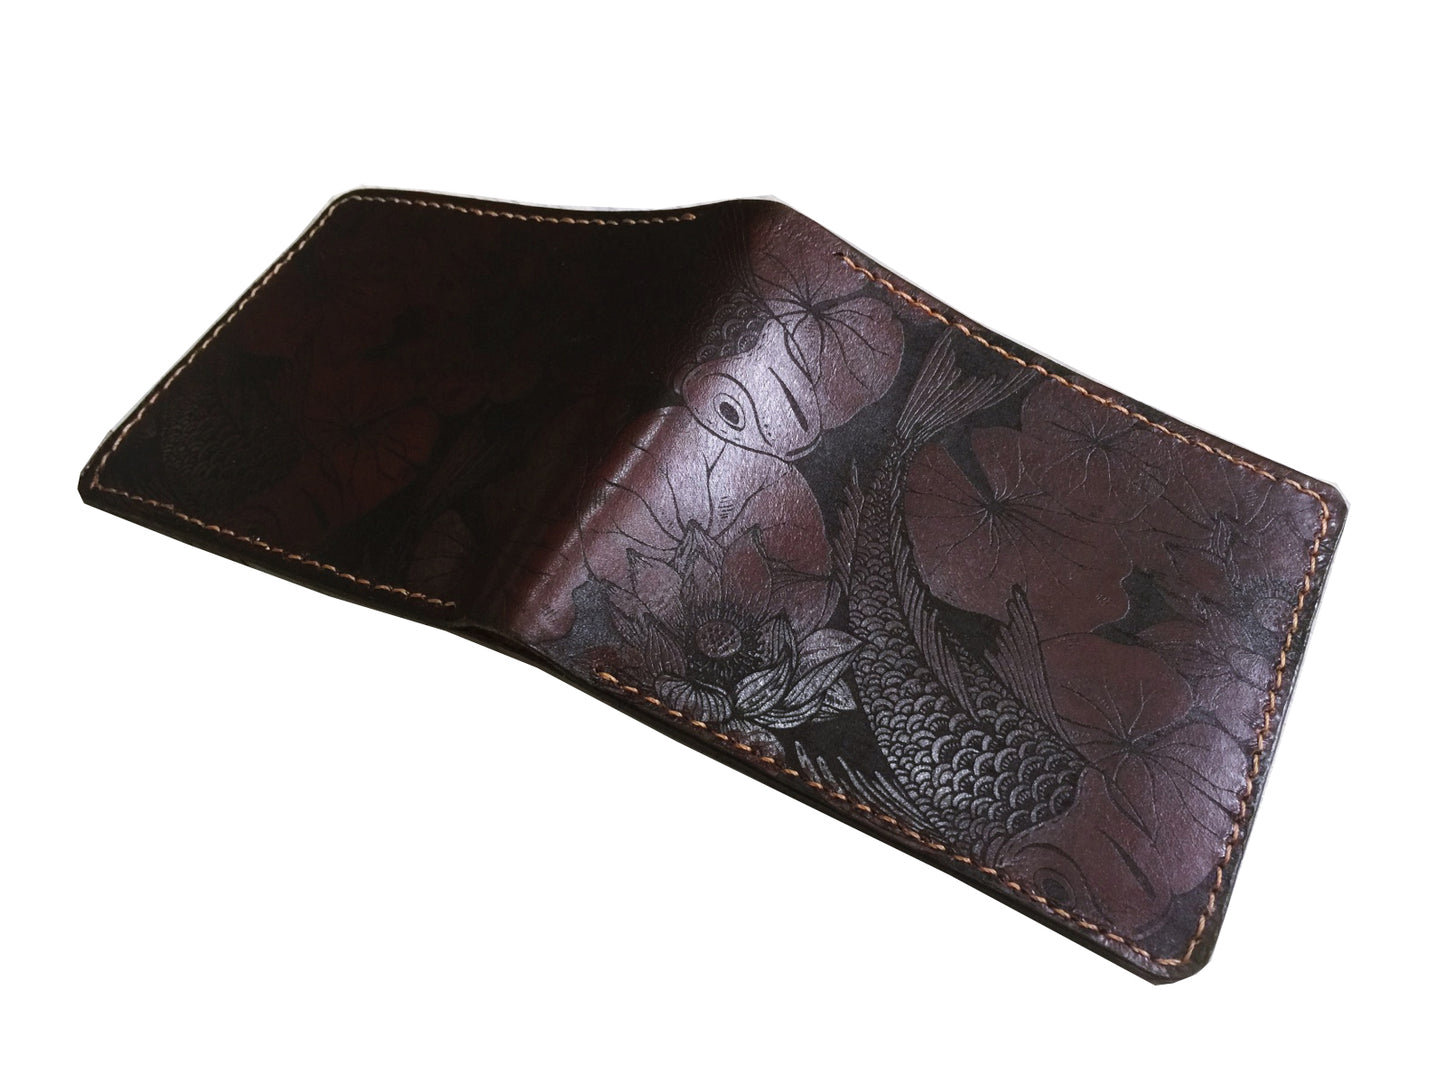 Mayan Corner - Koi animal pattern leather handmade men's wallet, custom gifts for him, father's day gifts, birthday gift 2021